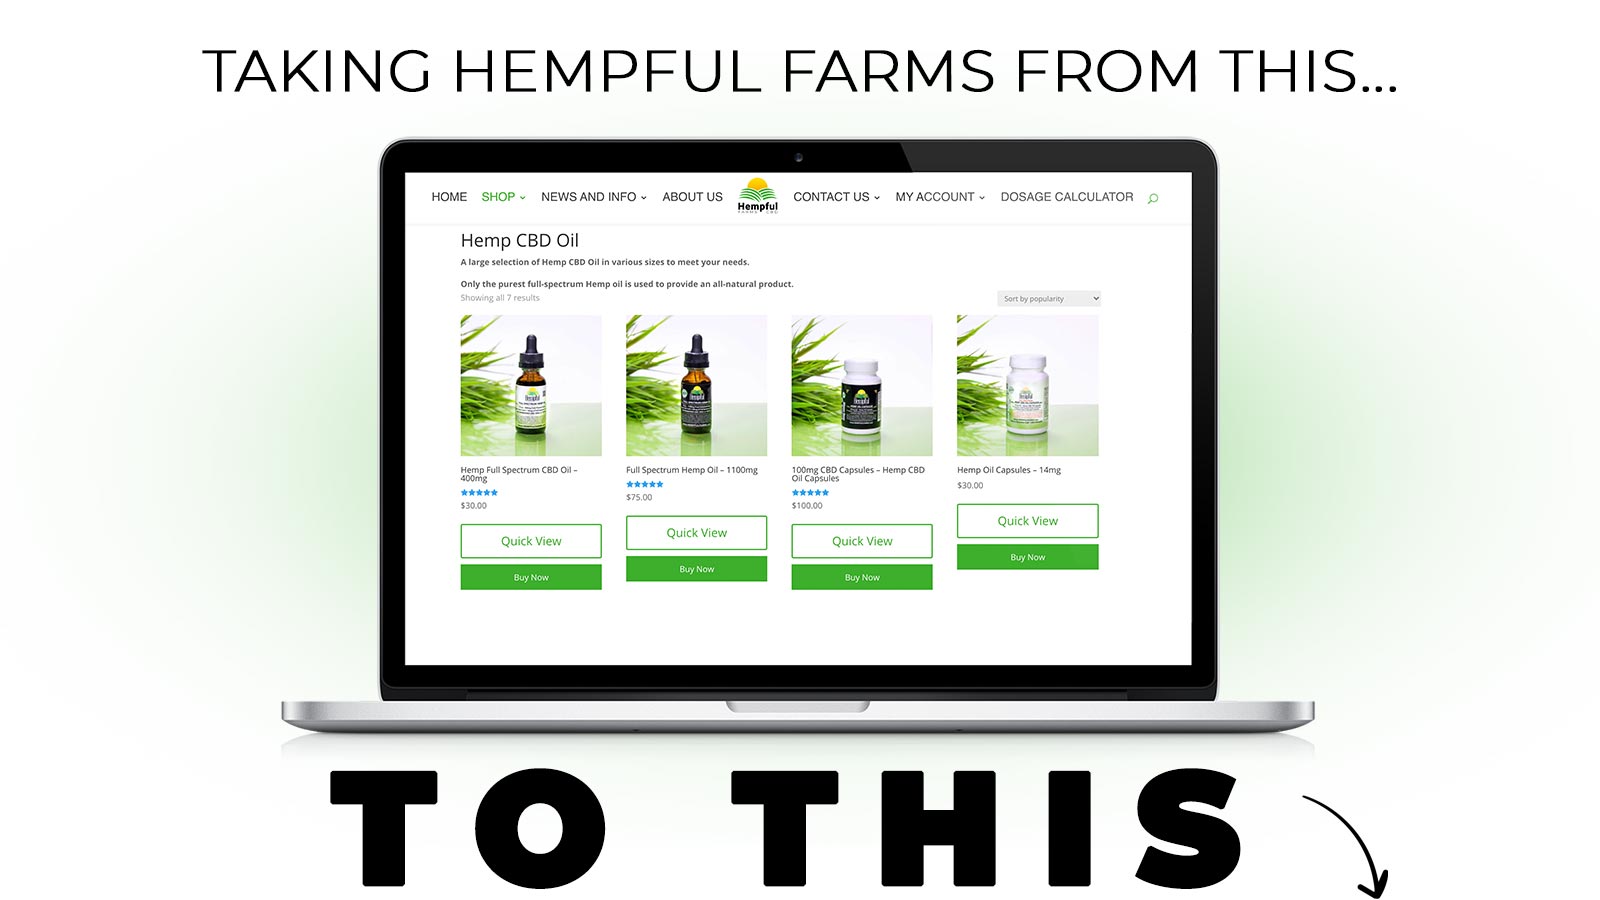 The old hempful farms website design